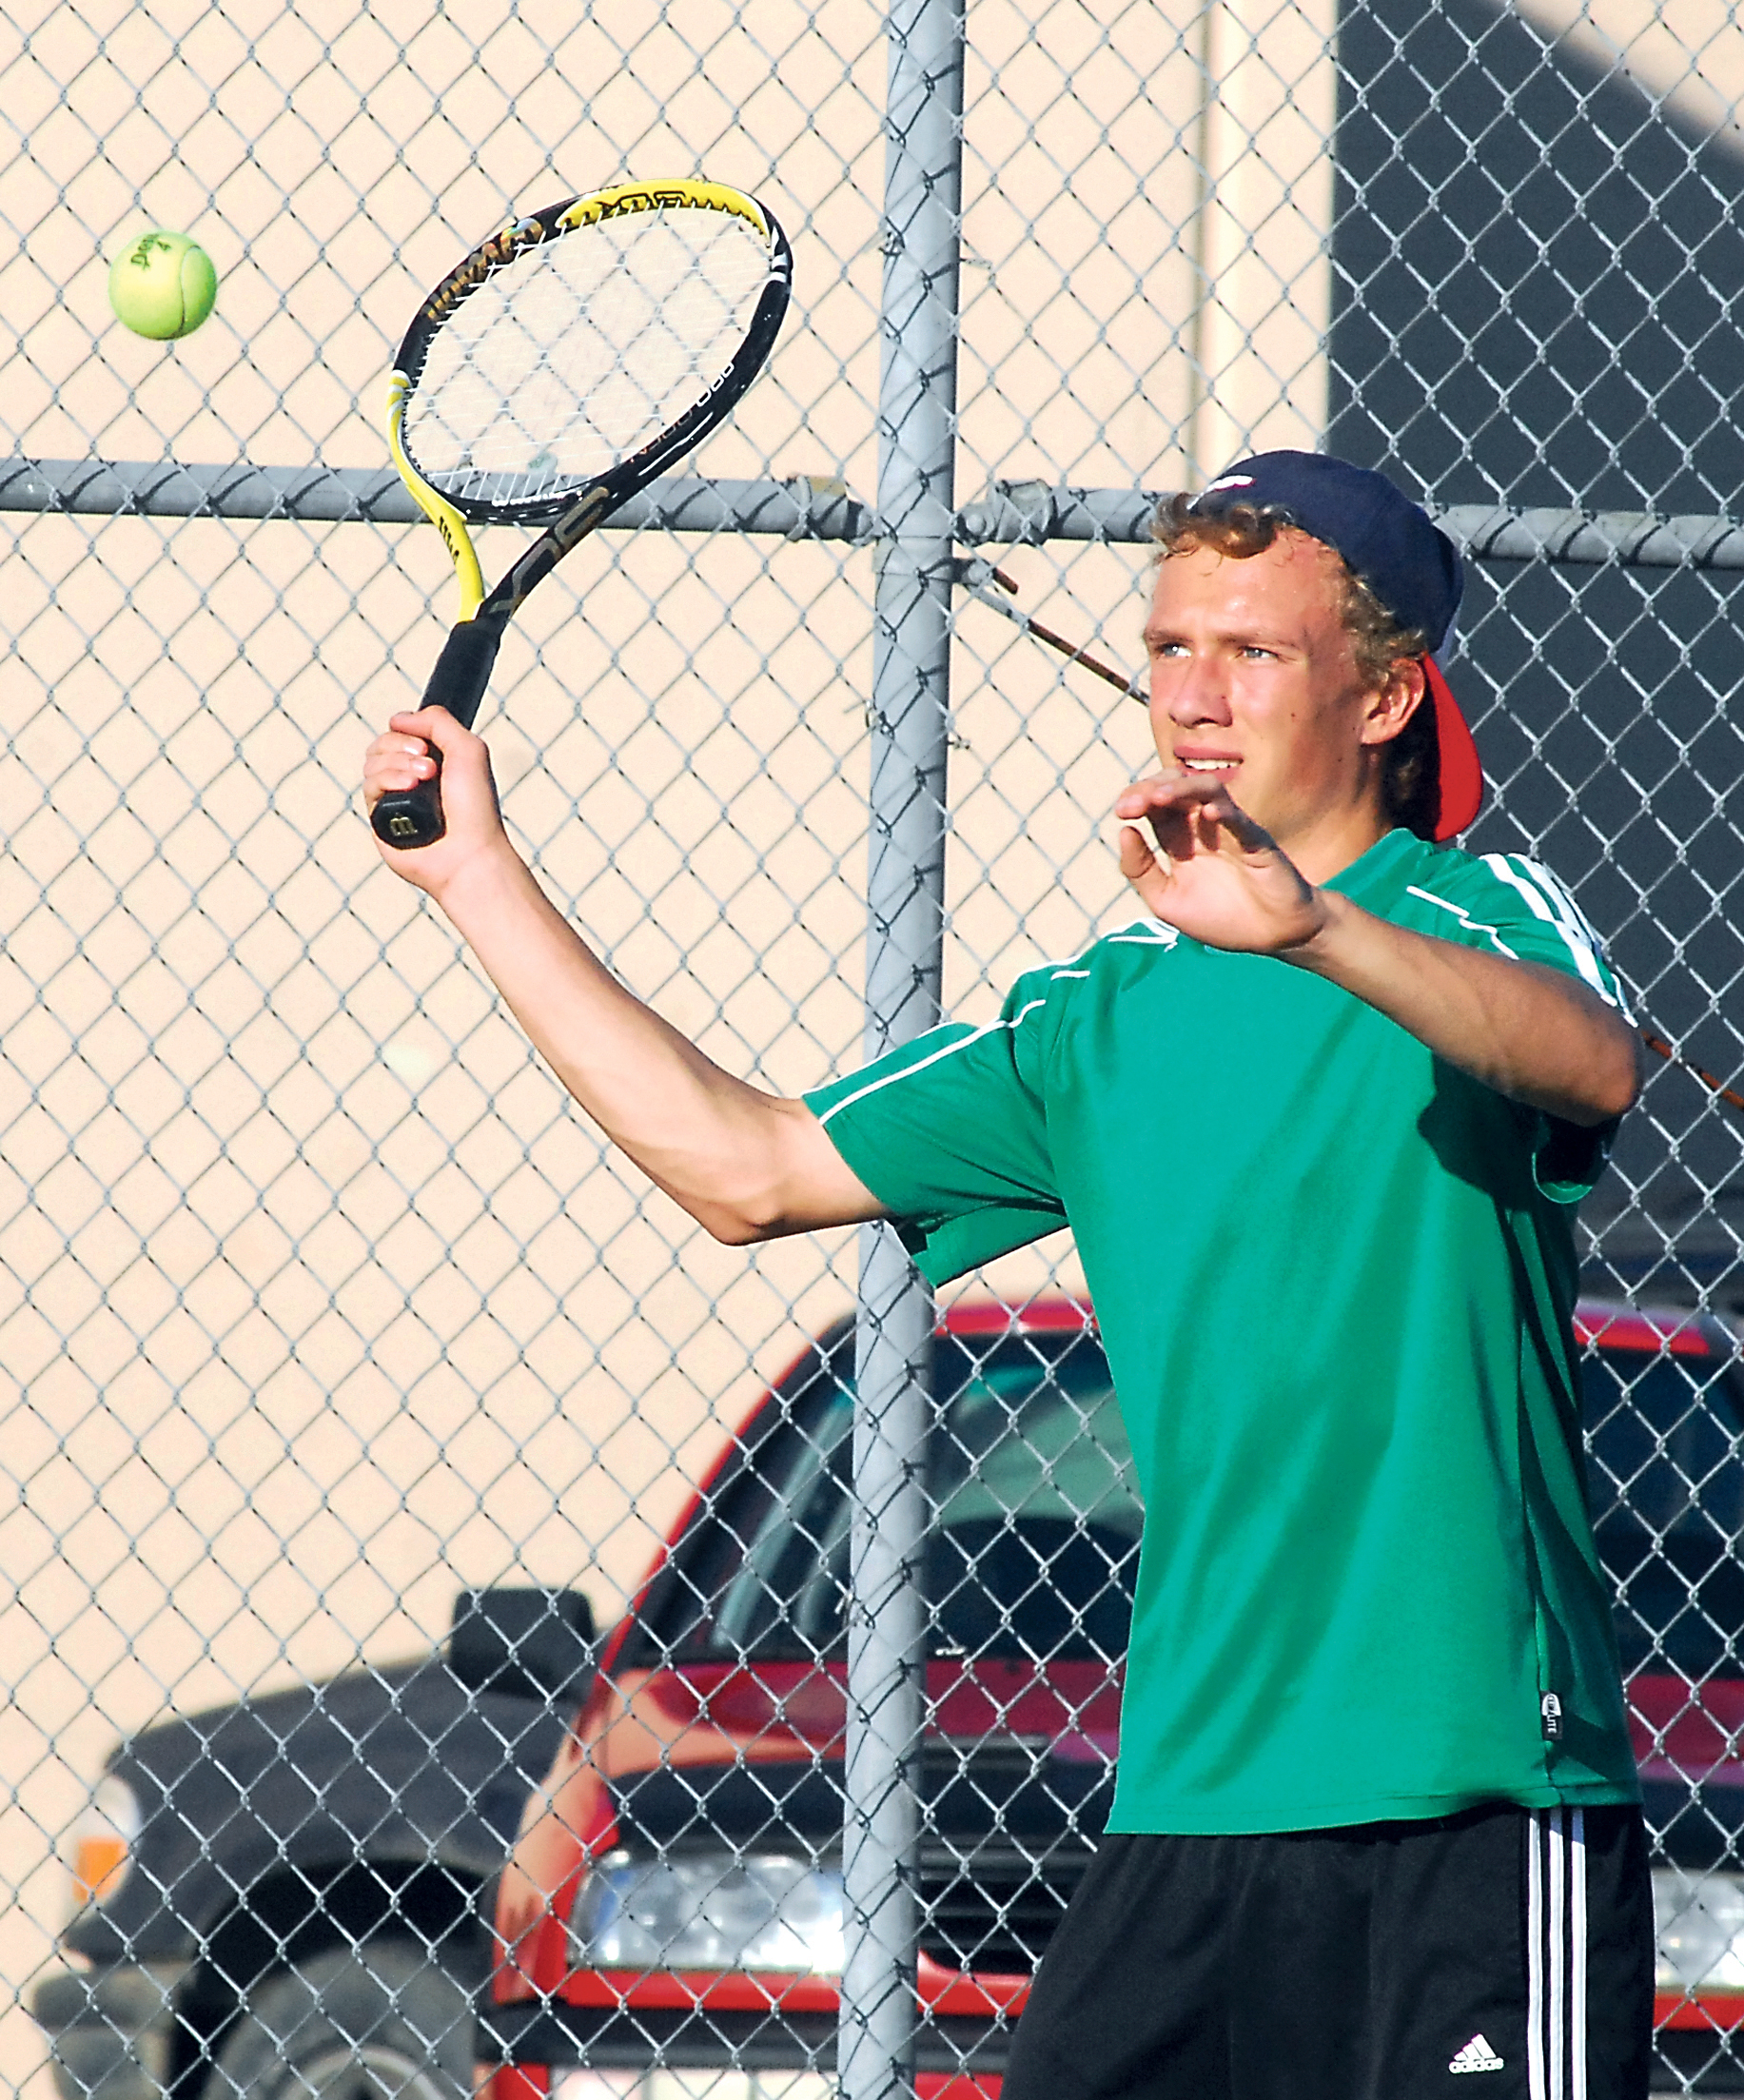 Port Angeles' Nick Fritschler plays against Sequim's Victor Lam in the No. 1 singles match. Keith Thorpe/Peninsula Daily News